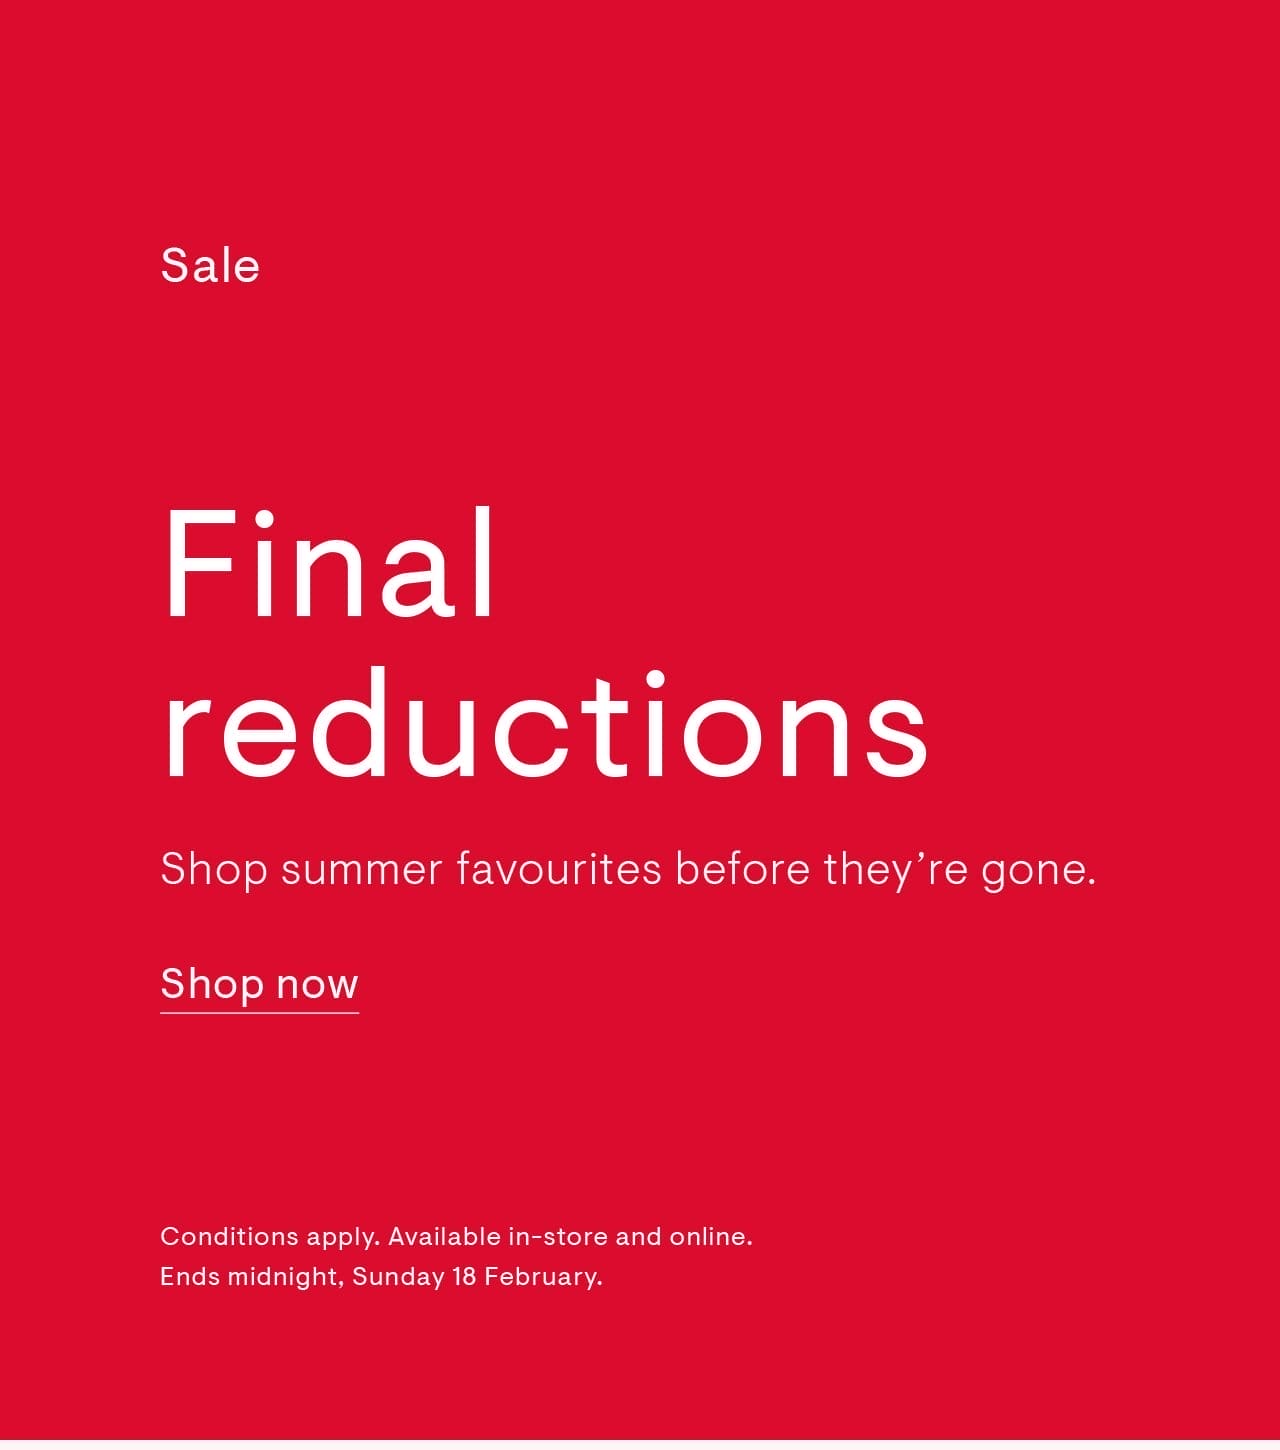 Final reductions: Now live